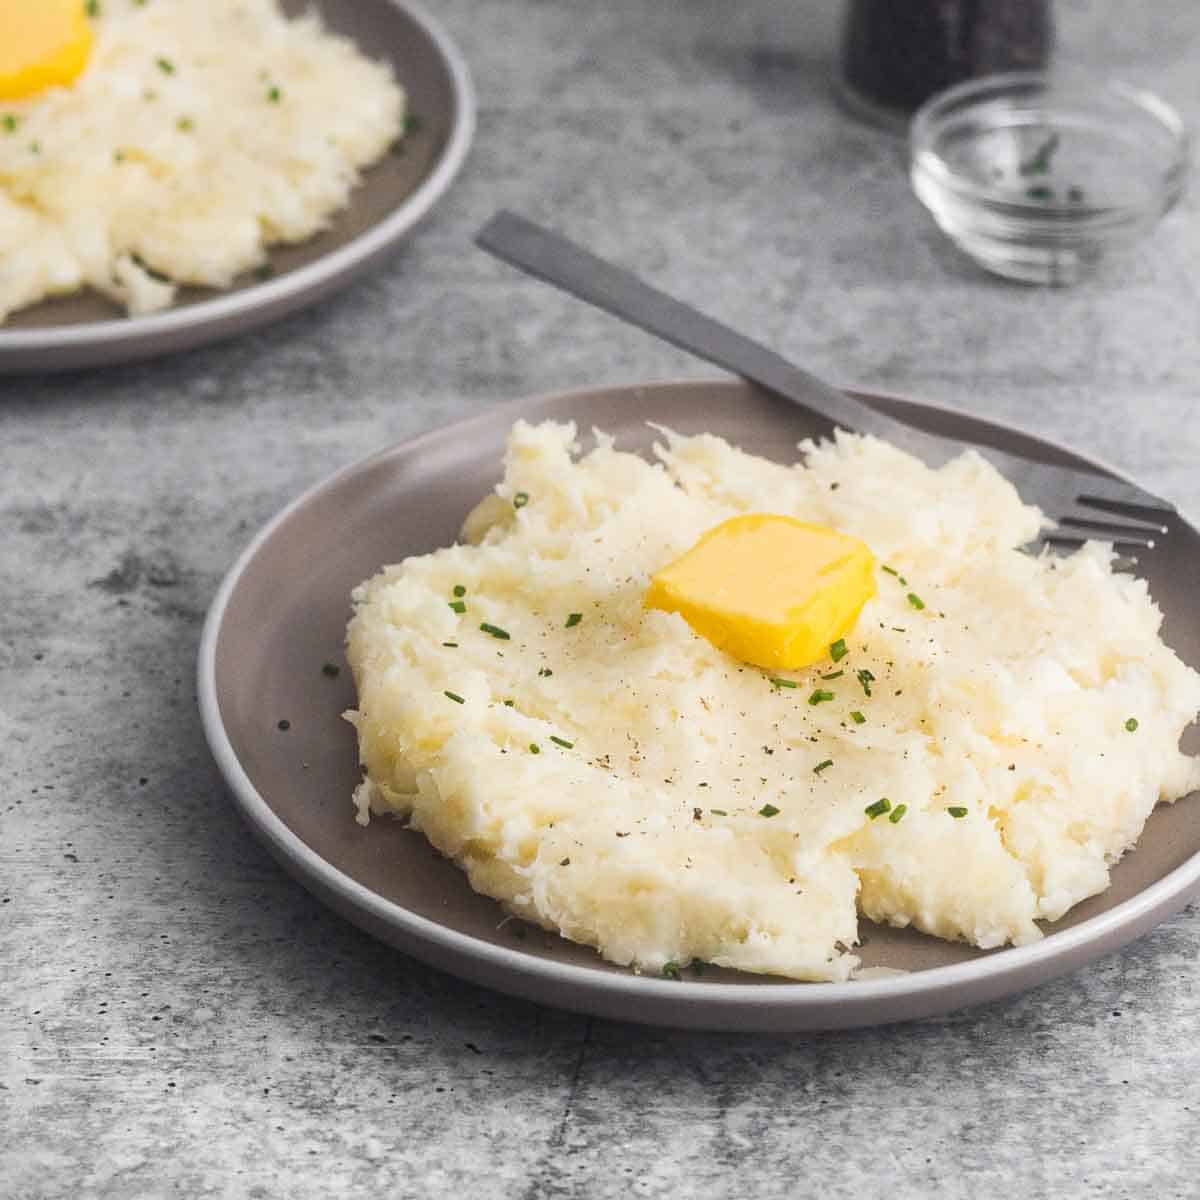 a plate served with mashed yuca with butter and chives